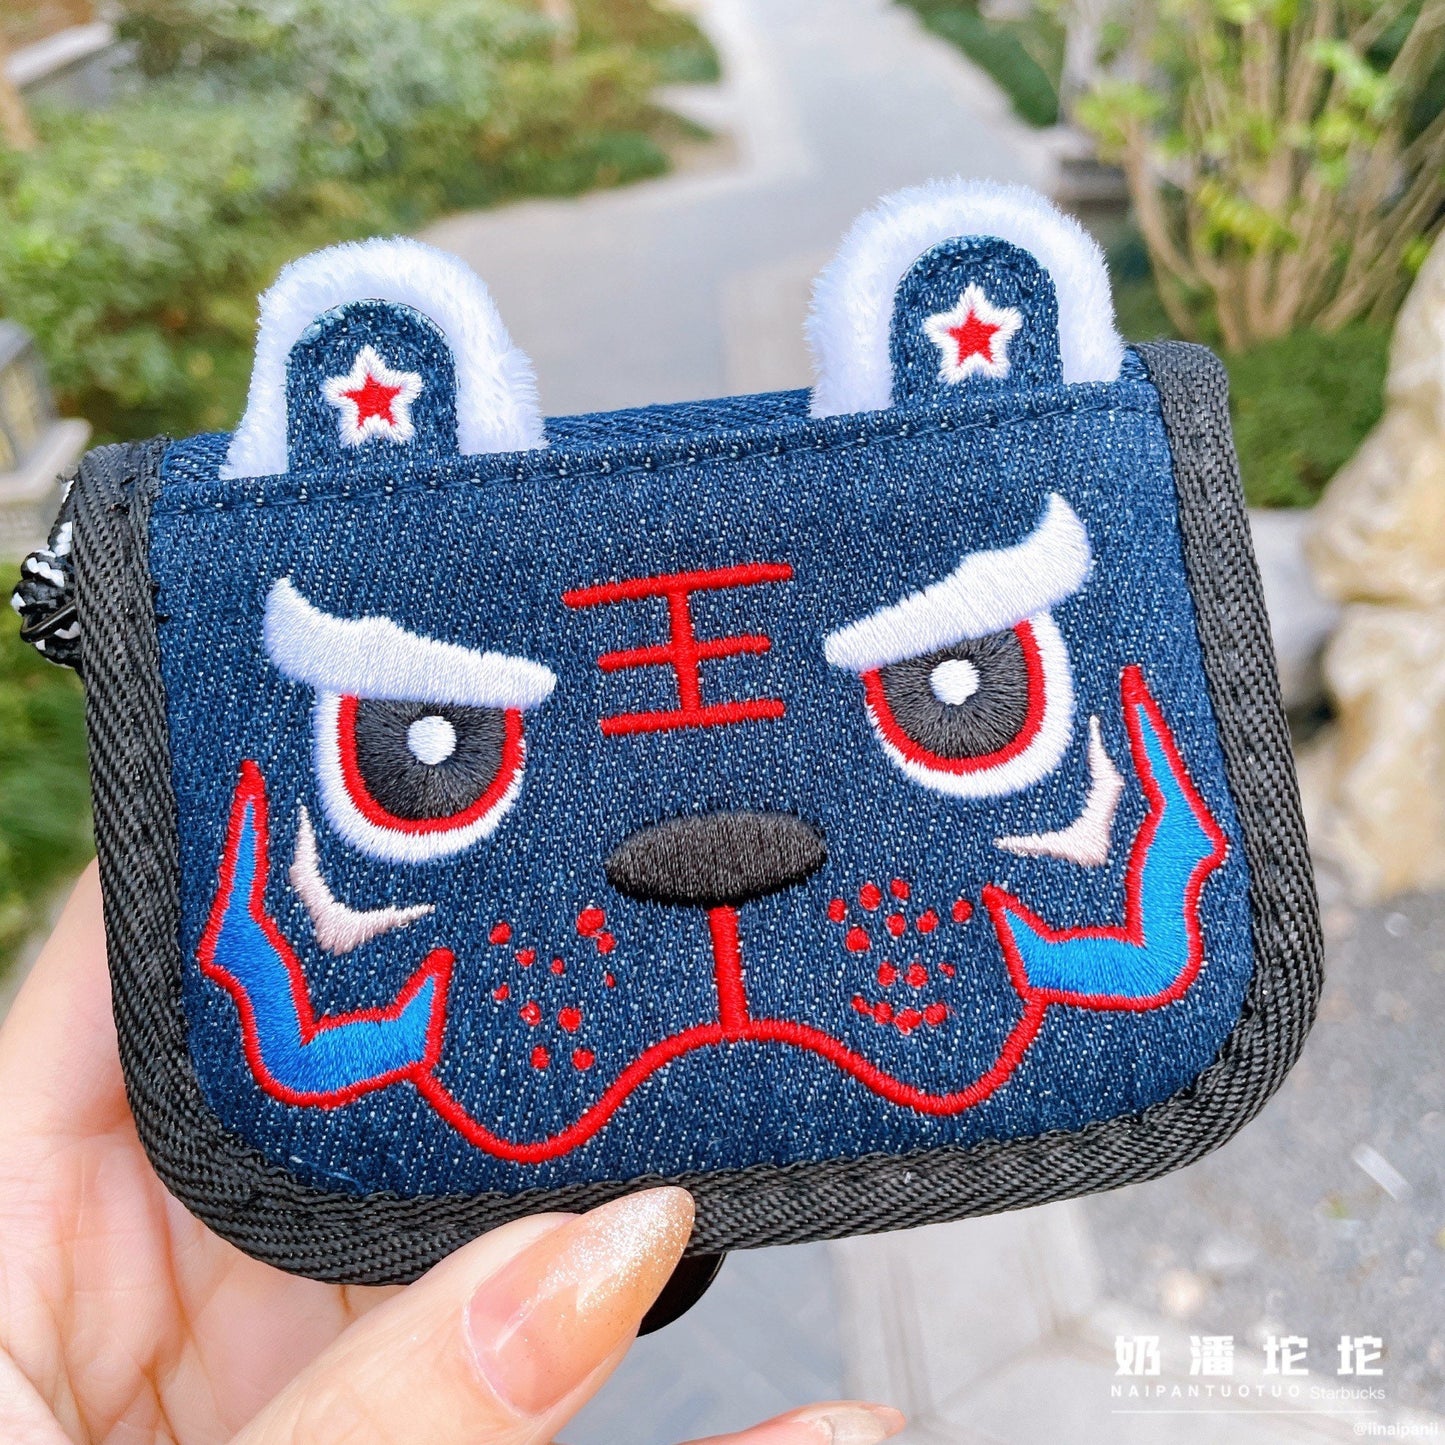 Starbucks China 2022 new year tiger series Chinese traditional tiger embroider cards holder（red/blue）